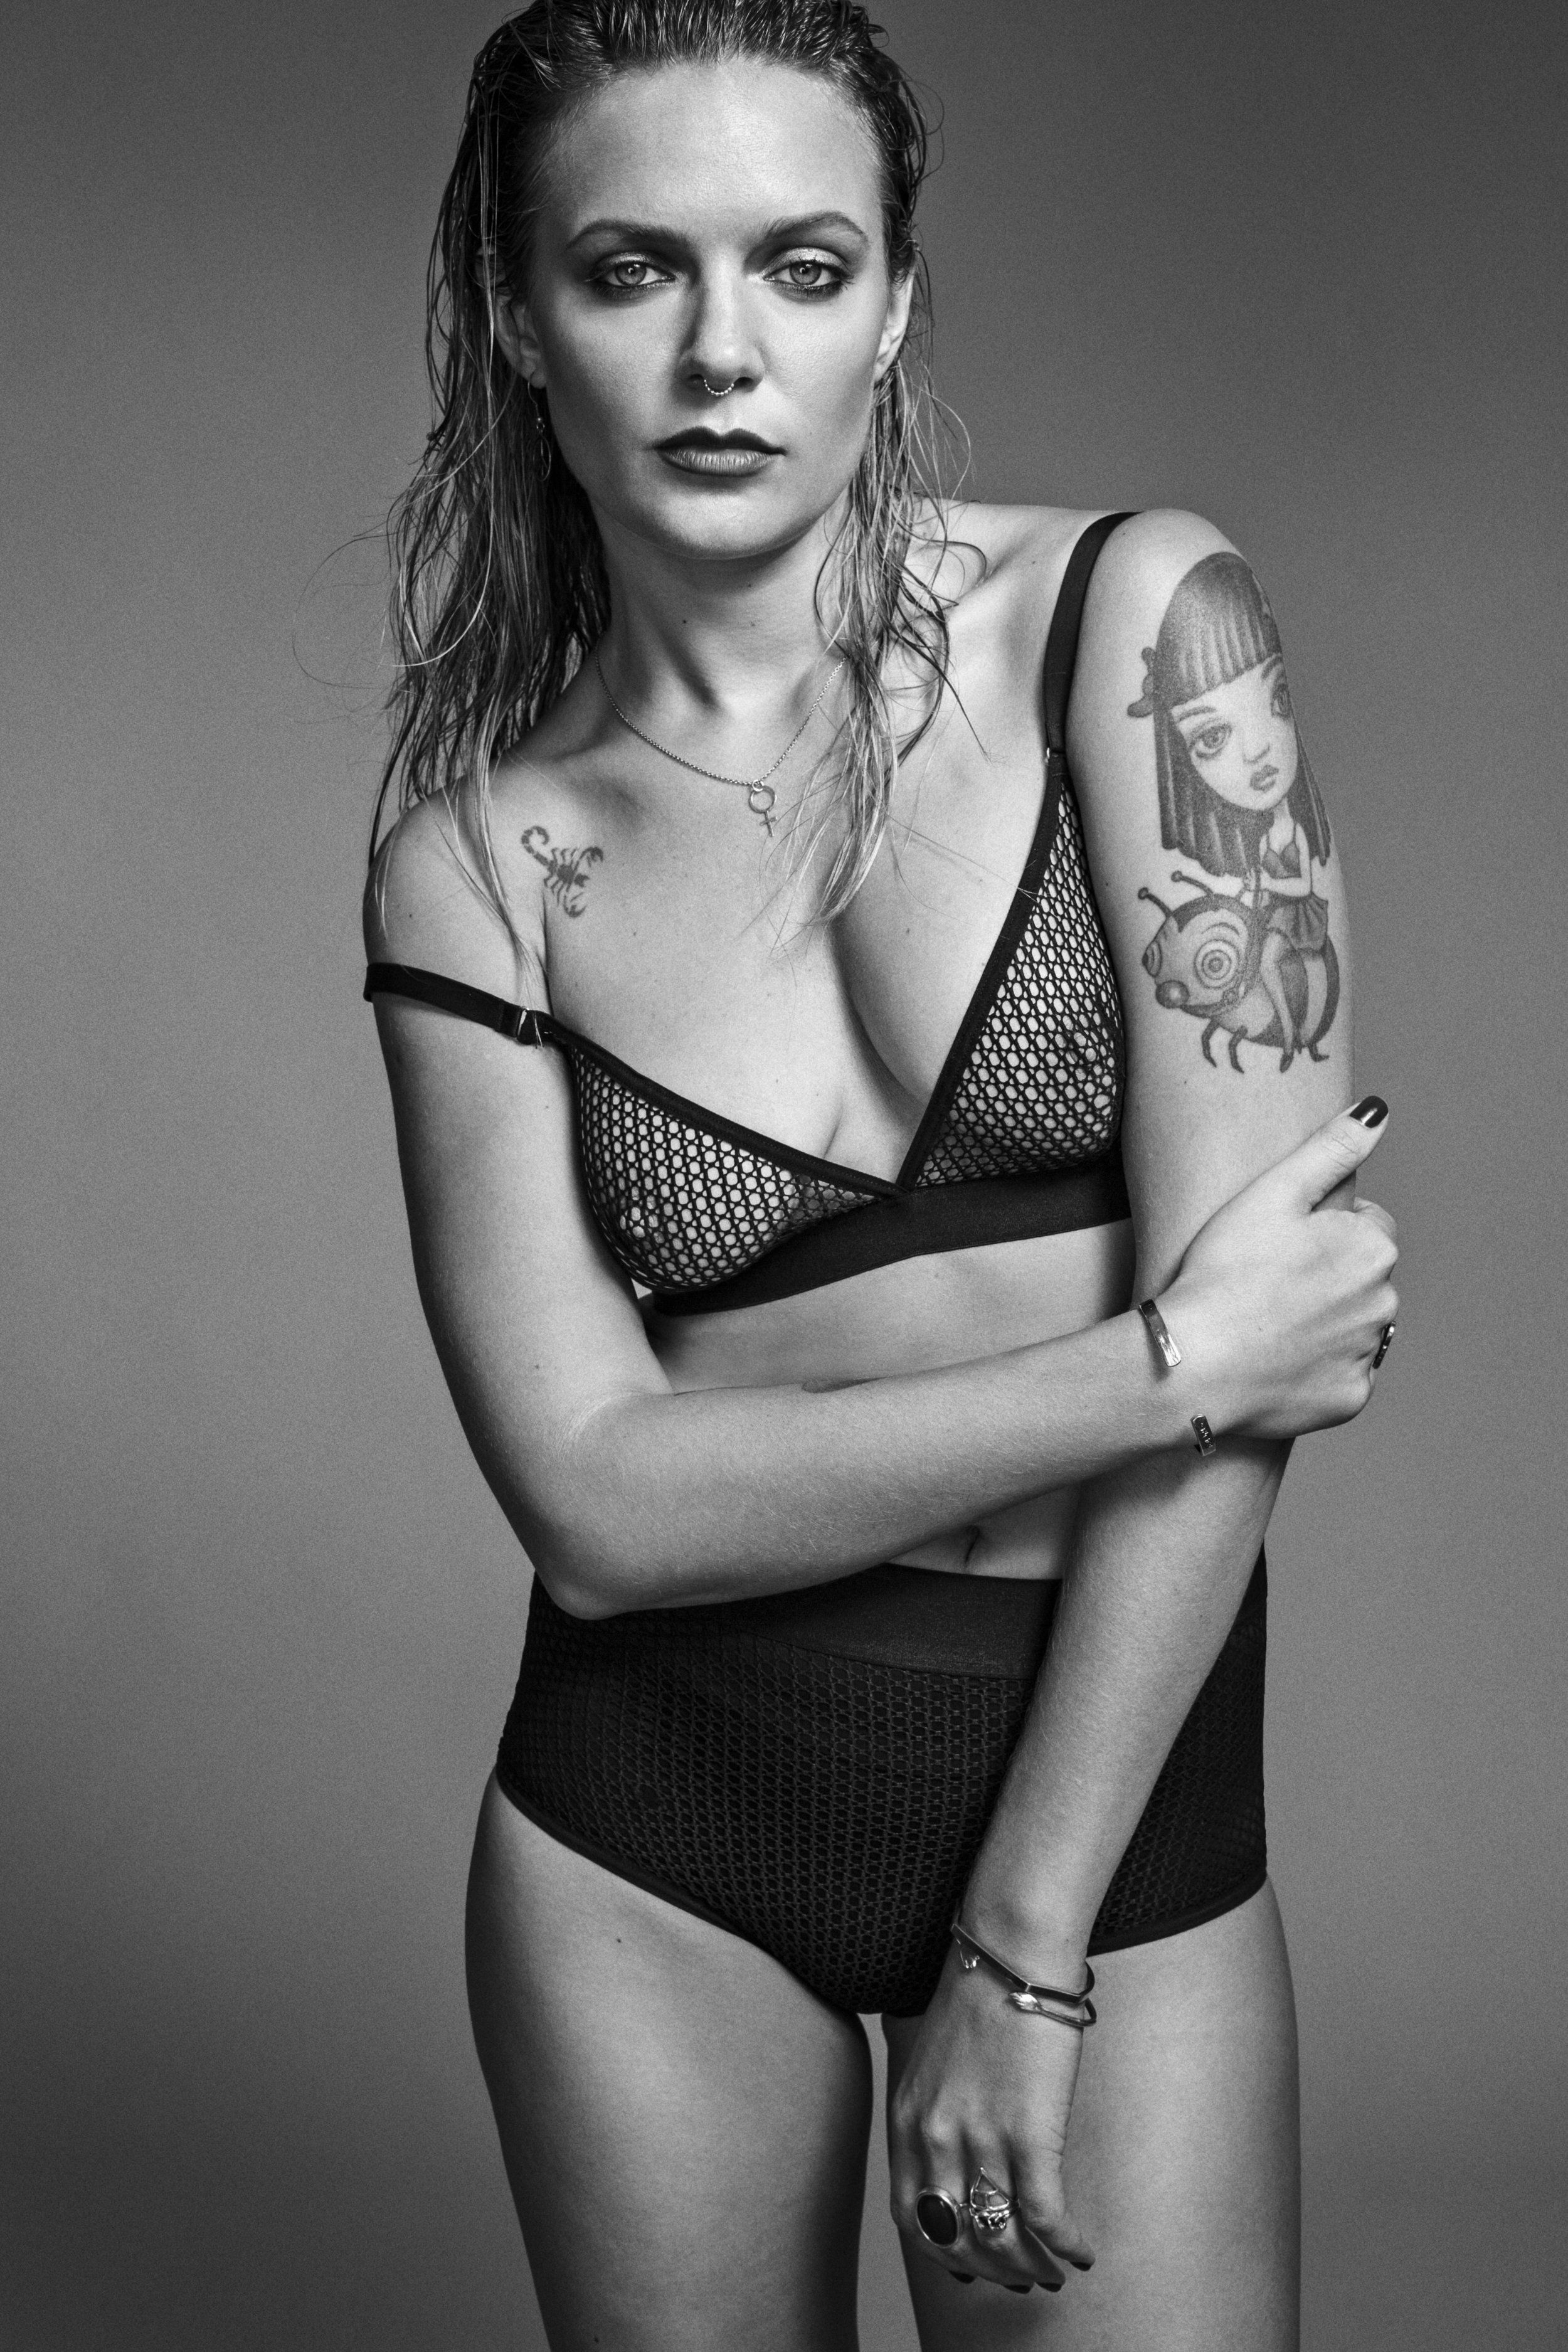 Tove lo foto in topless
 #79600560